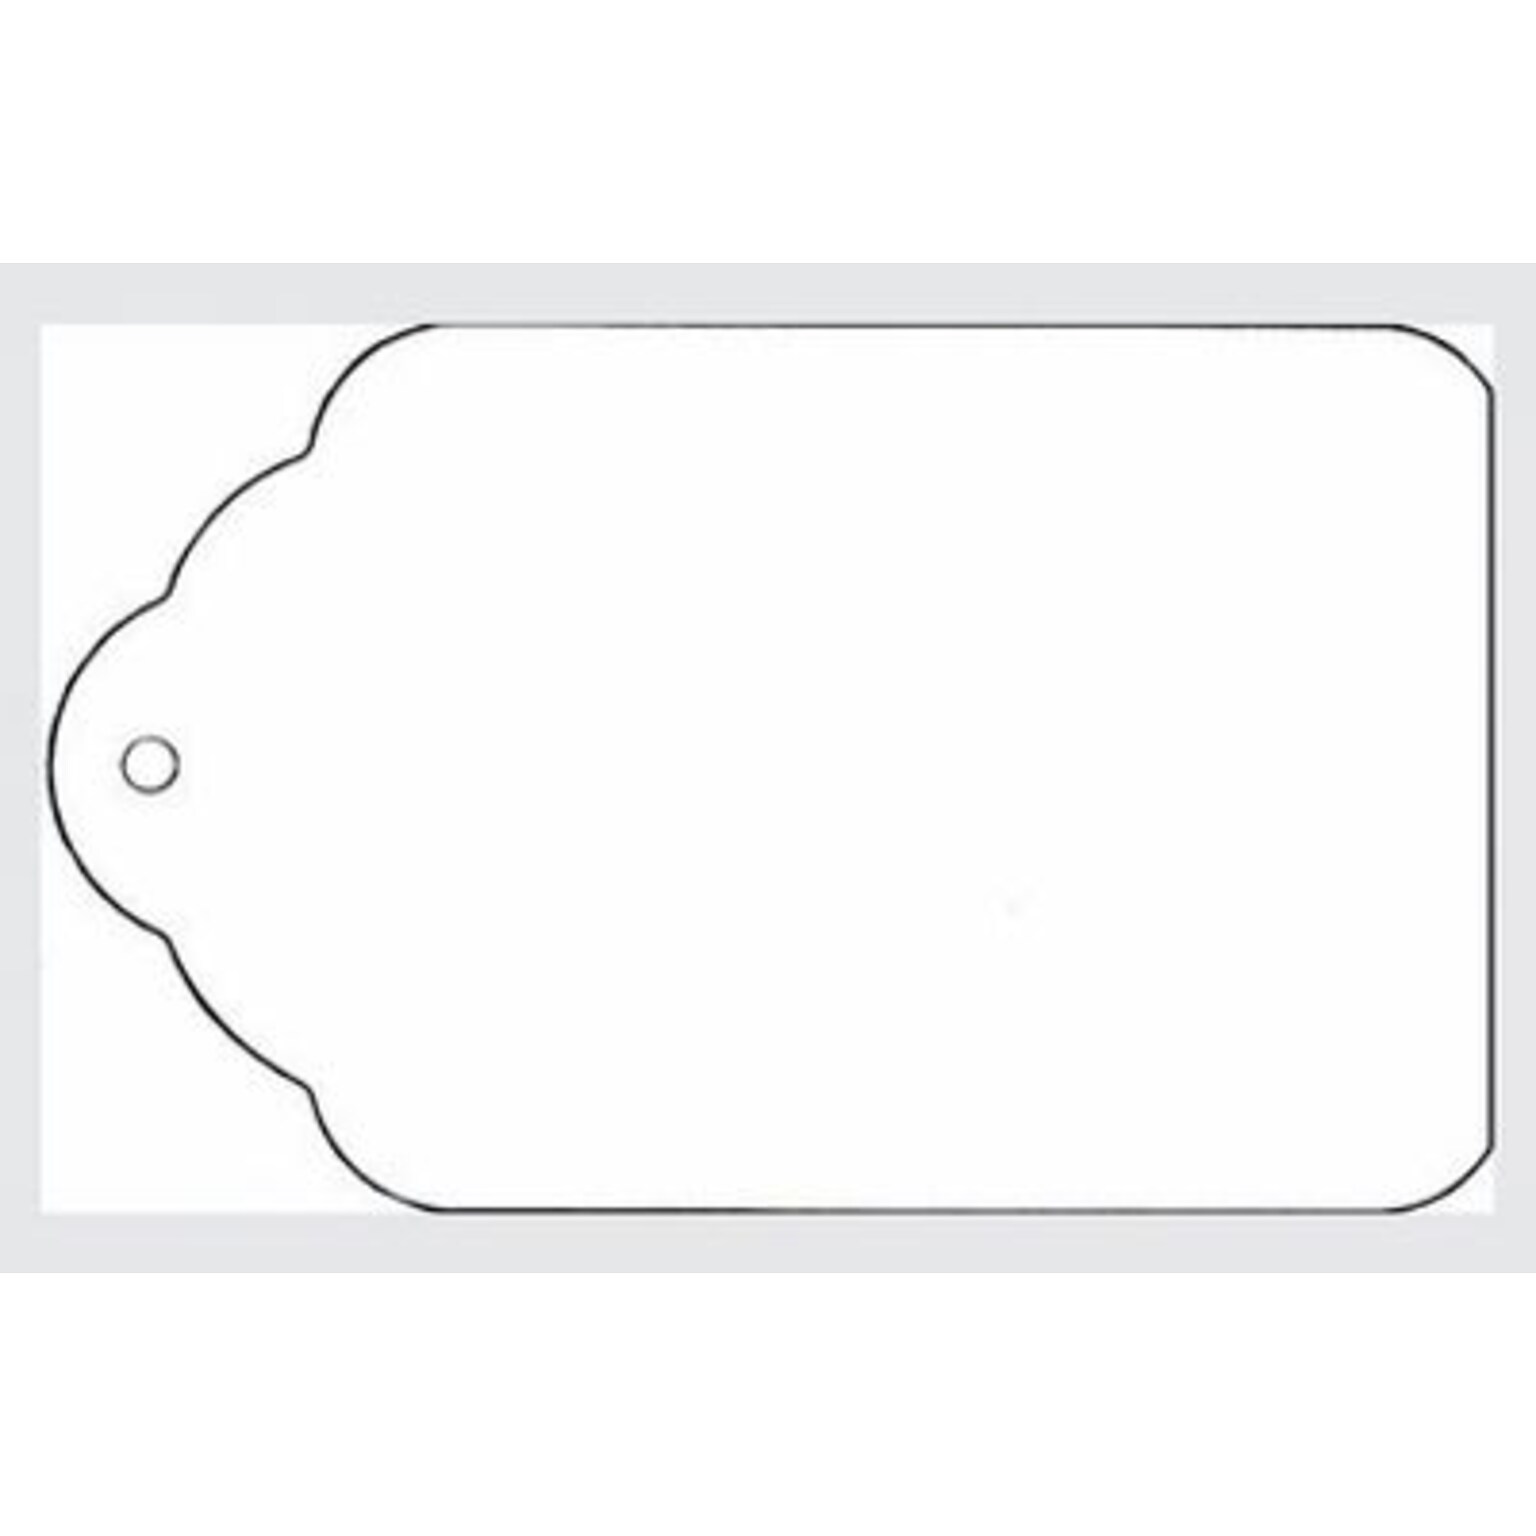 NAHANCO 1 5/16 x 1 15/16 Strung All Purpose Merchandise Tag, White, 1000/Pack